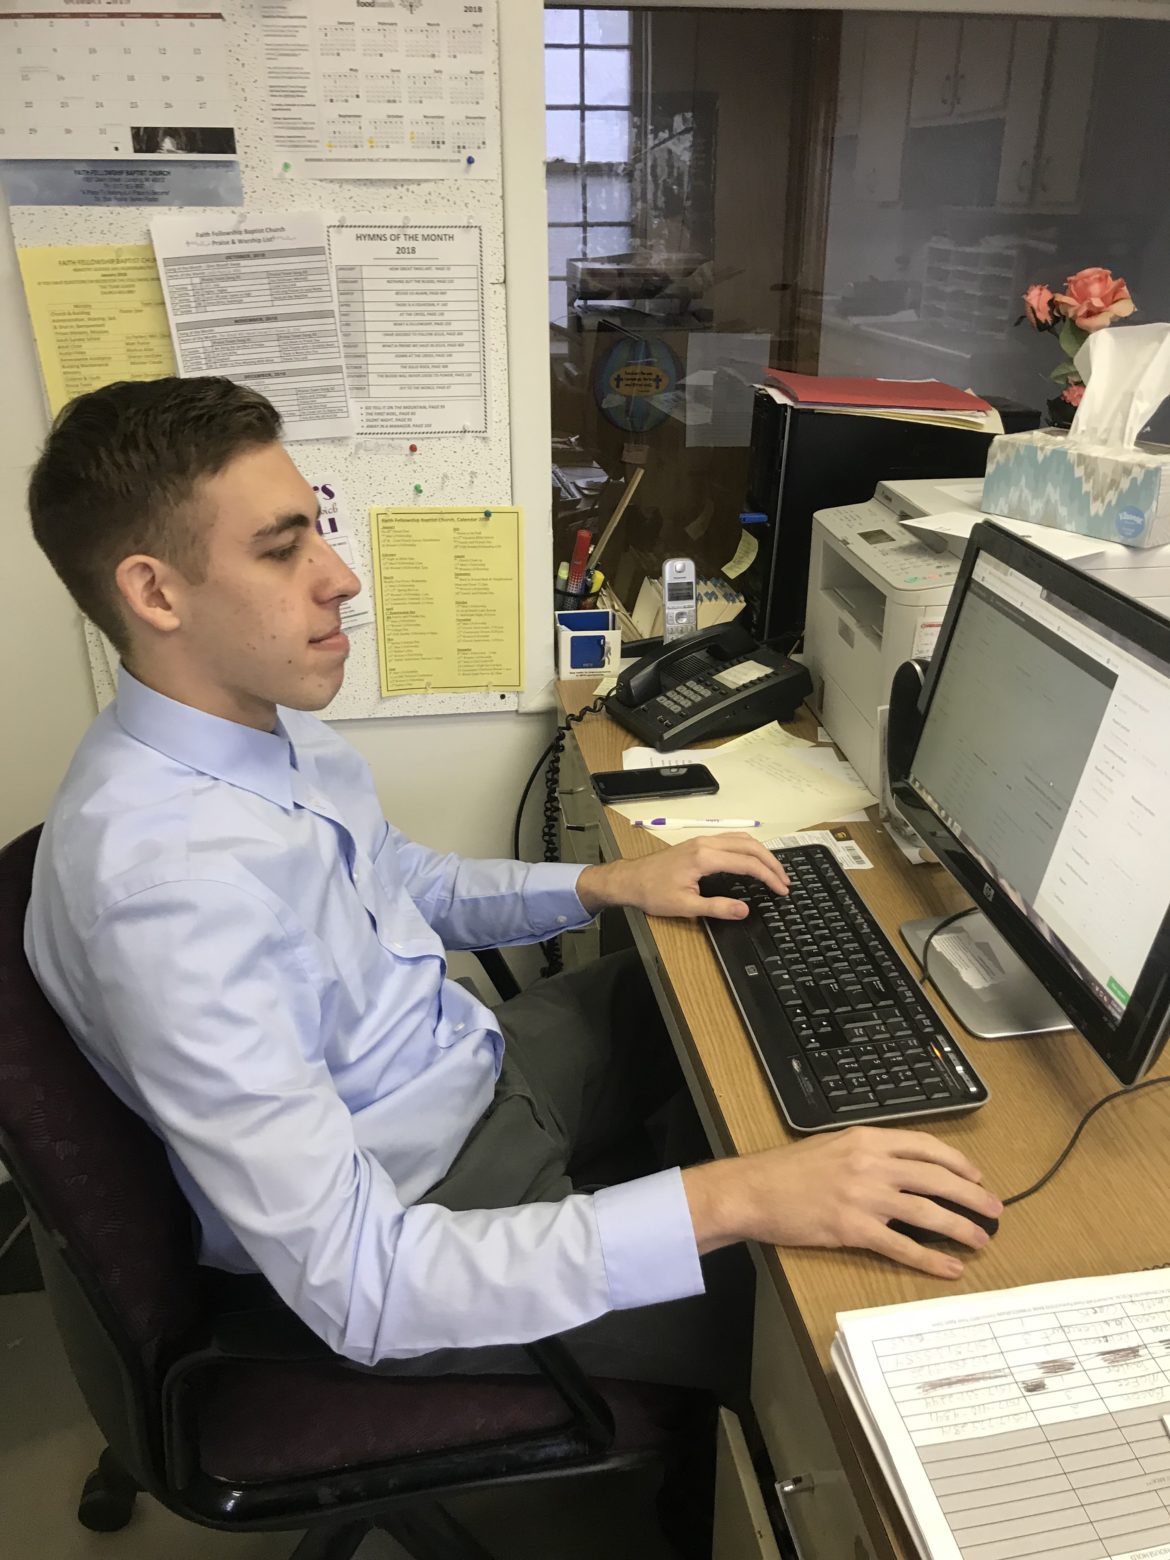 MSU student Logan Parth, an Eastside Community Action Center volunteer, works on financial statements and bookkeeping to gain experience in his field of study, accounting.